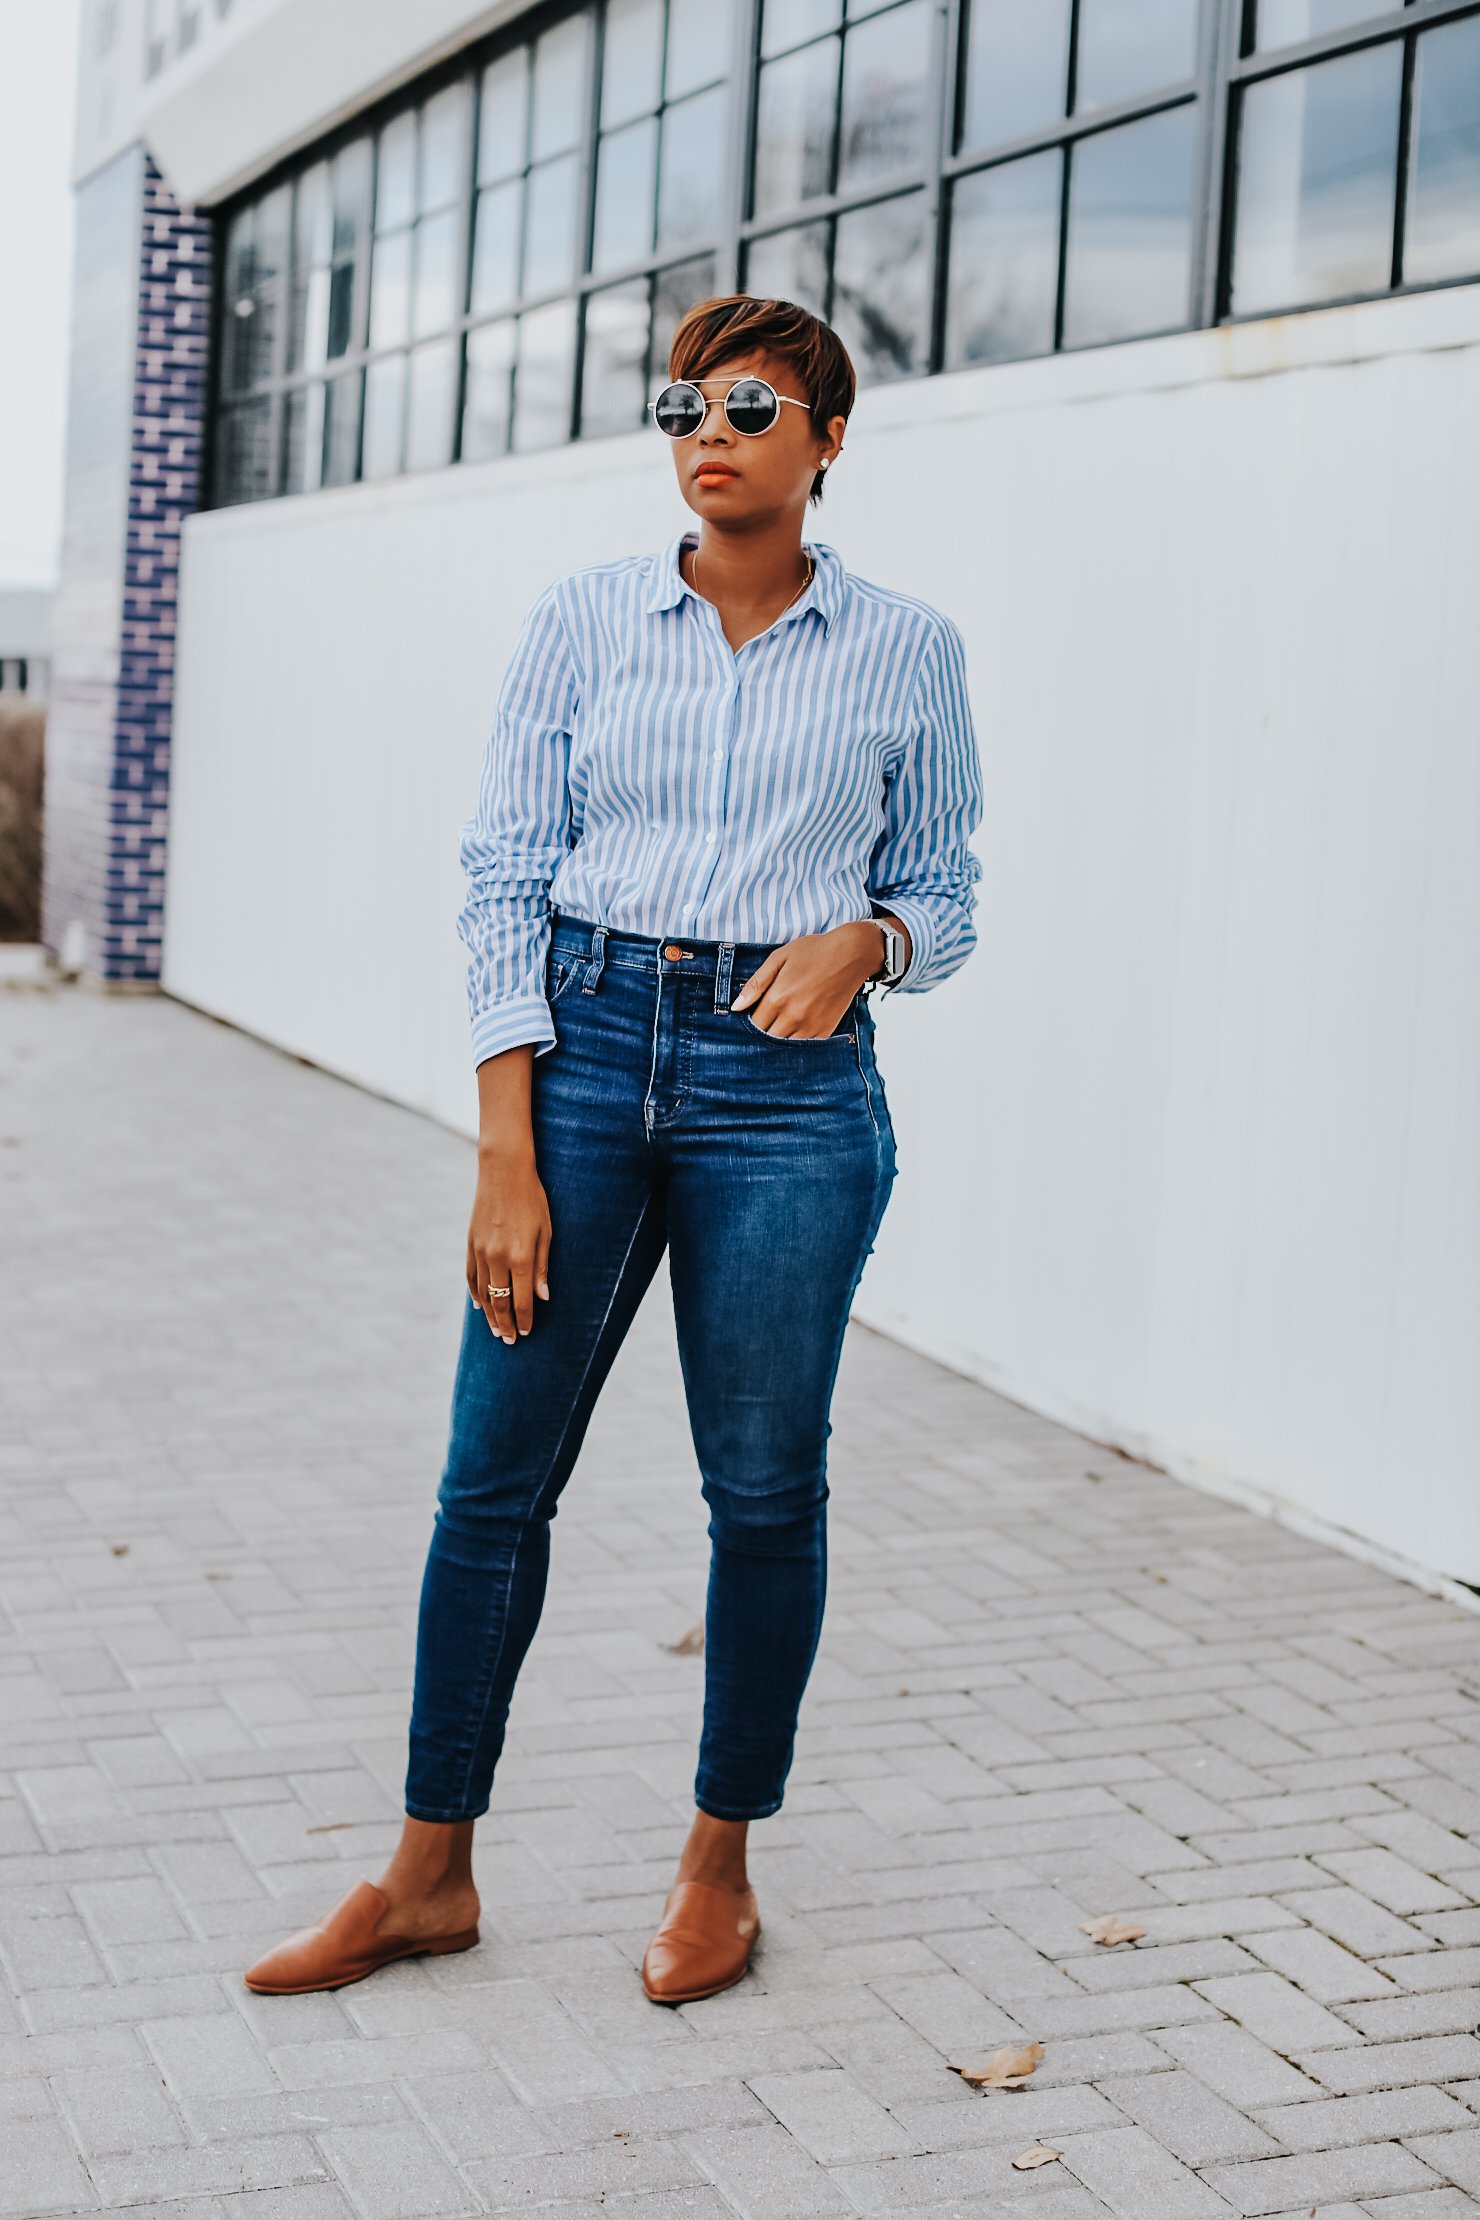 Mary's Little Way in A Blue and White Striped Boyfriend Shirt, Blue Jeans, and Tan Mules